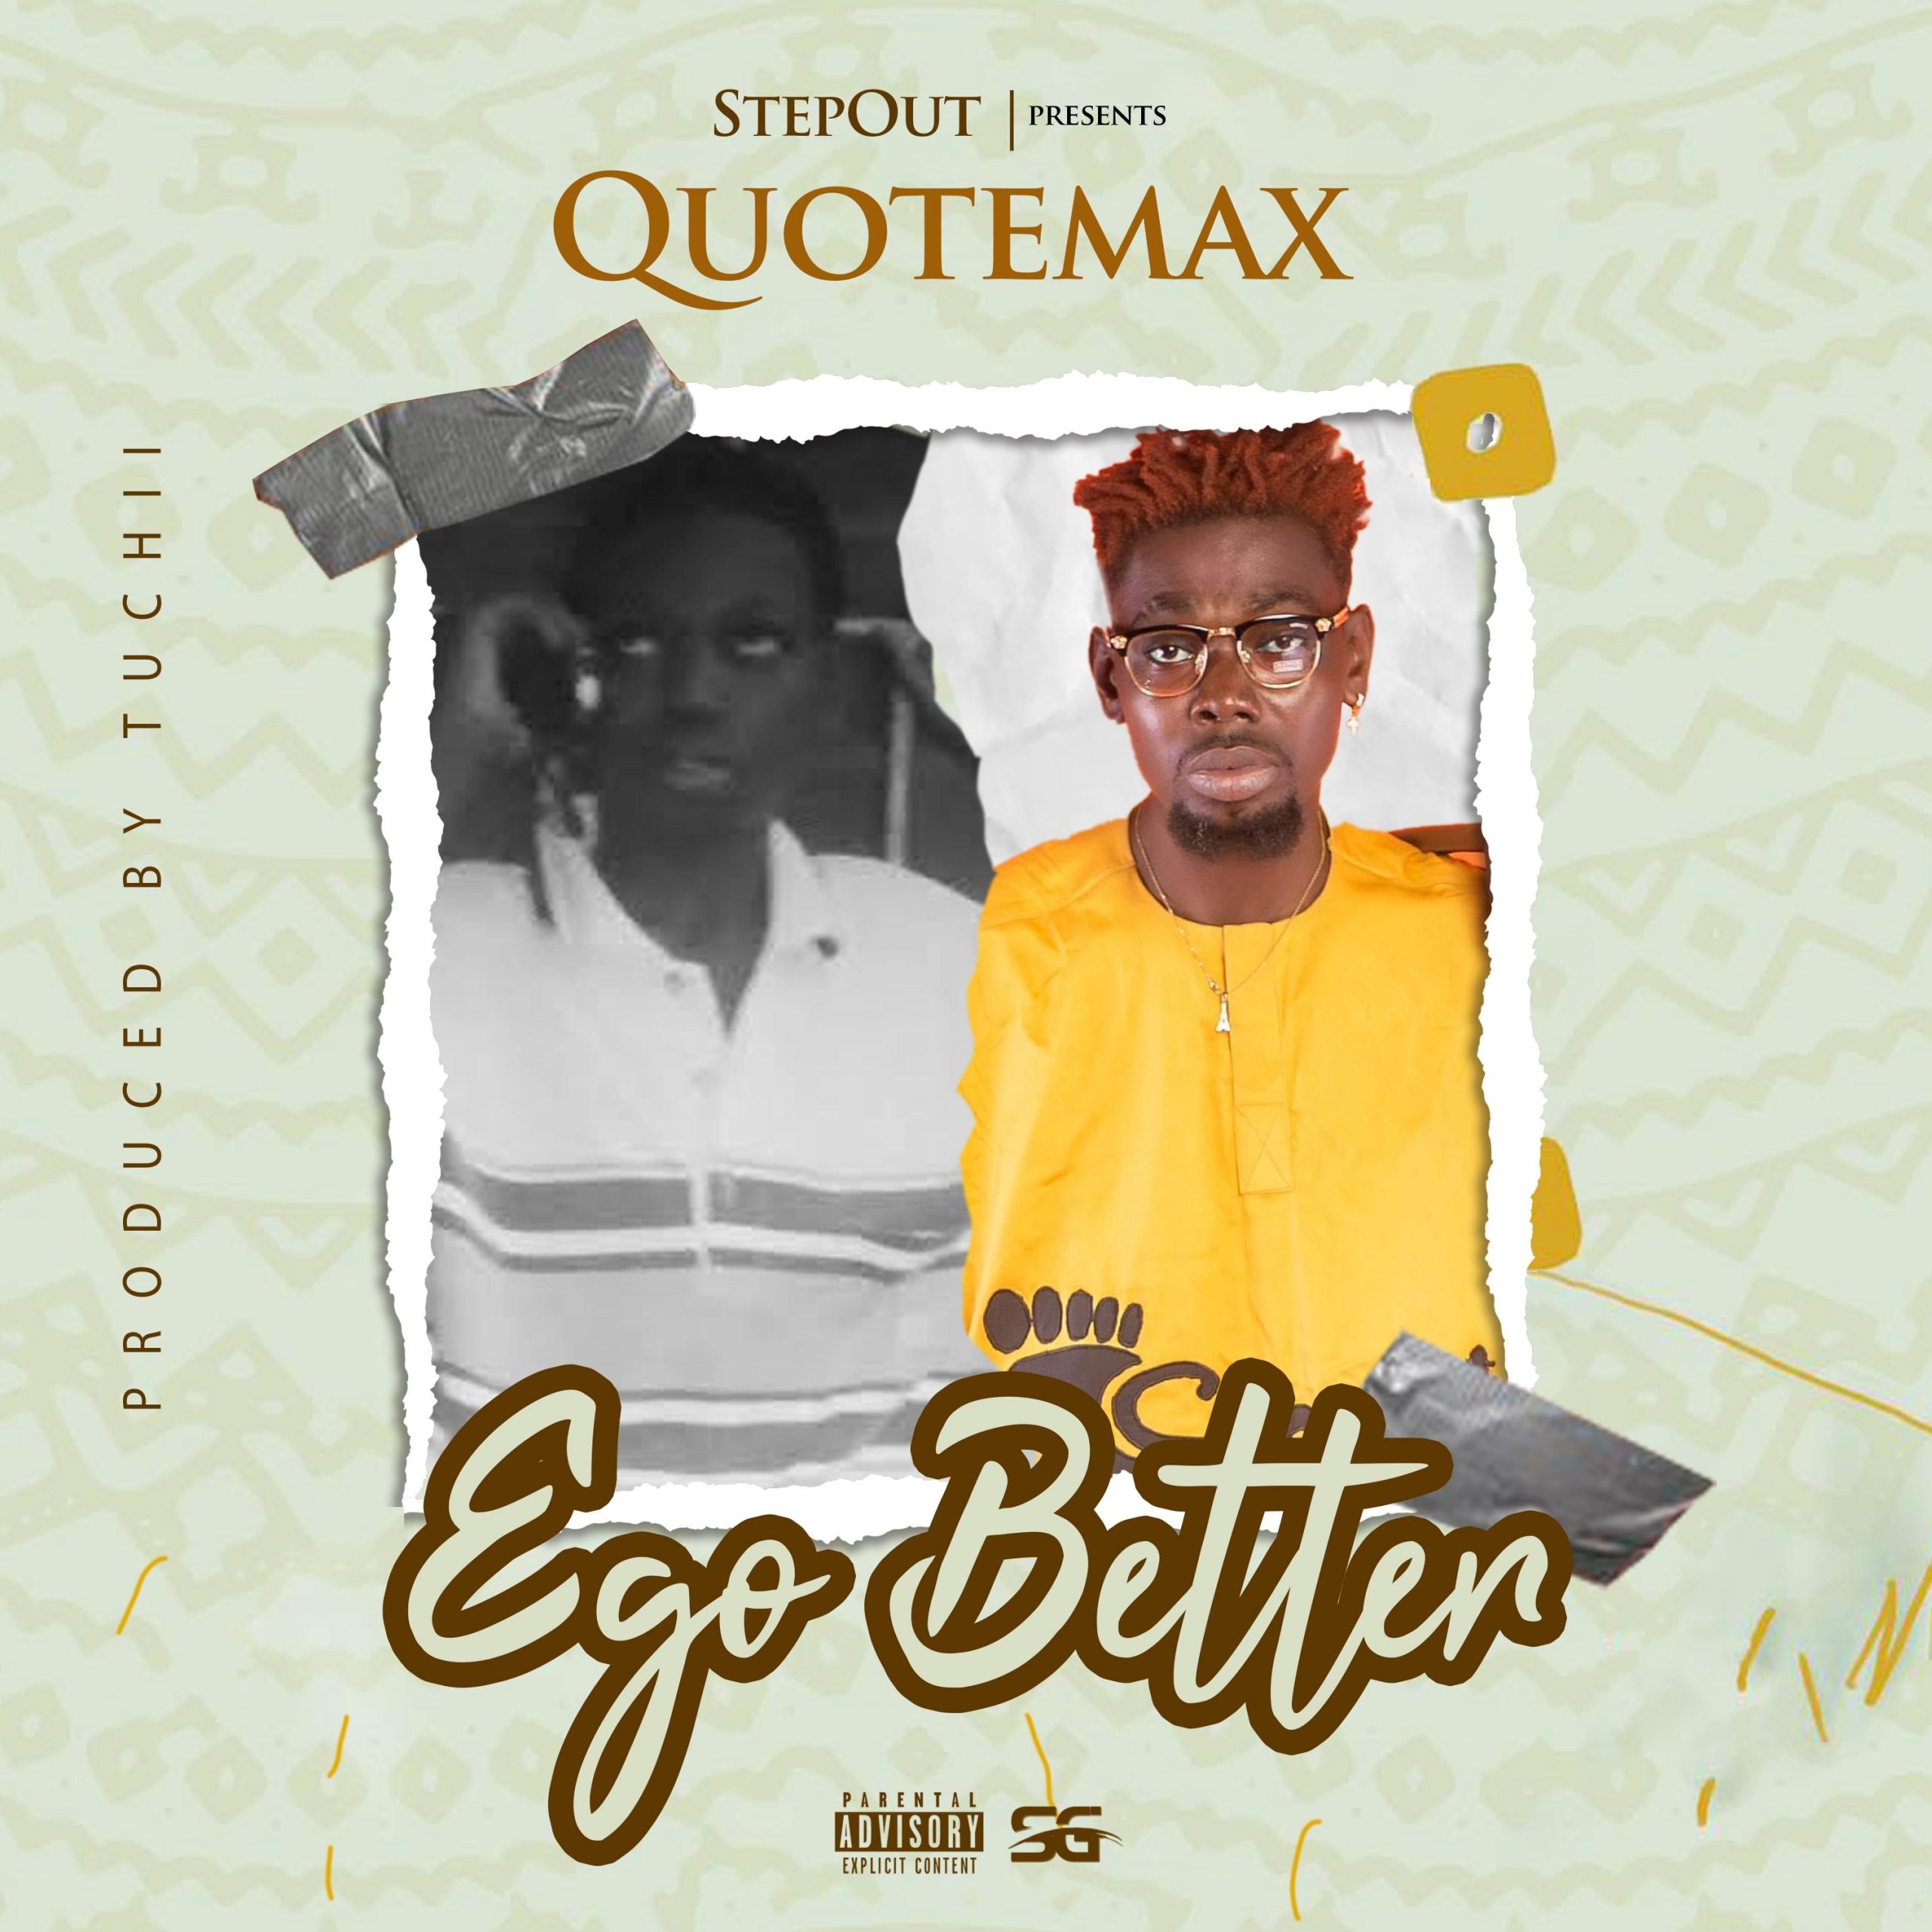 Quotemax – Ego Better